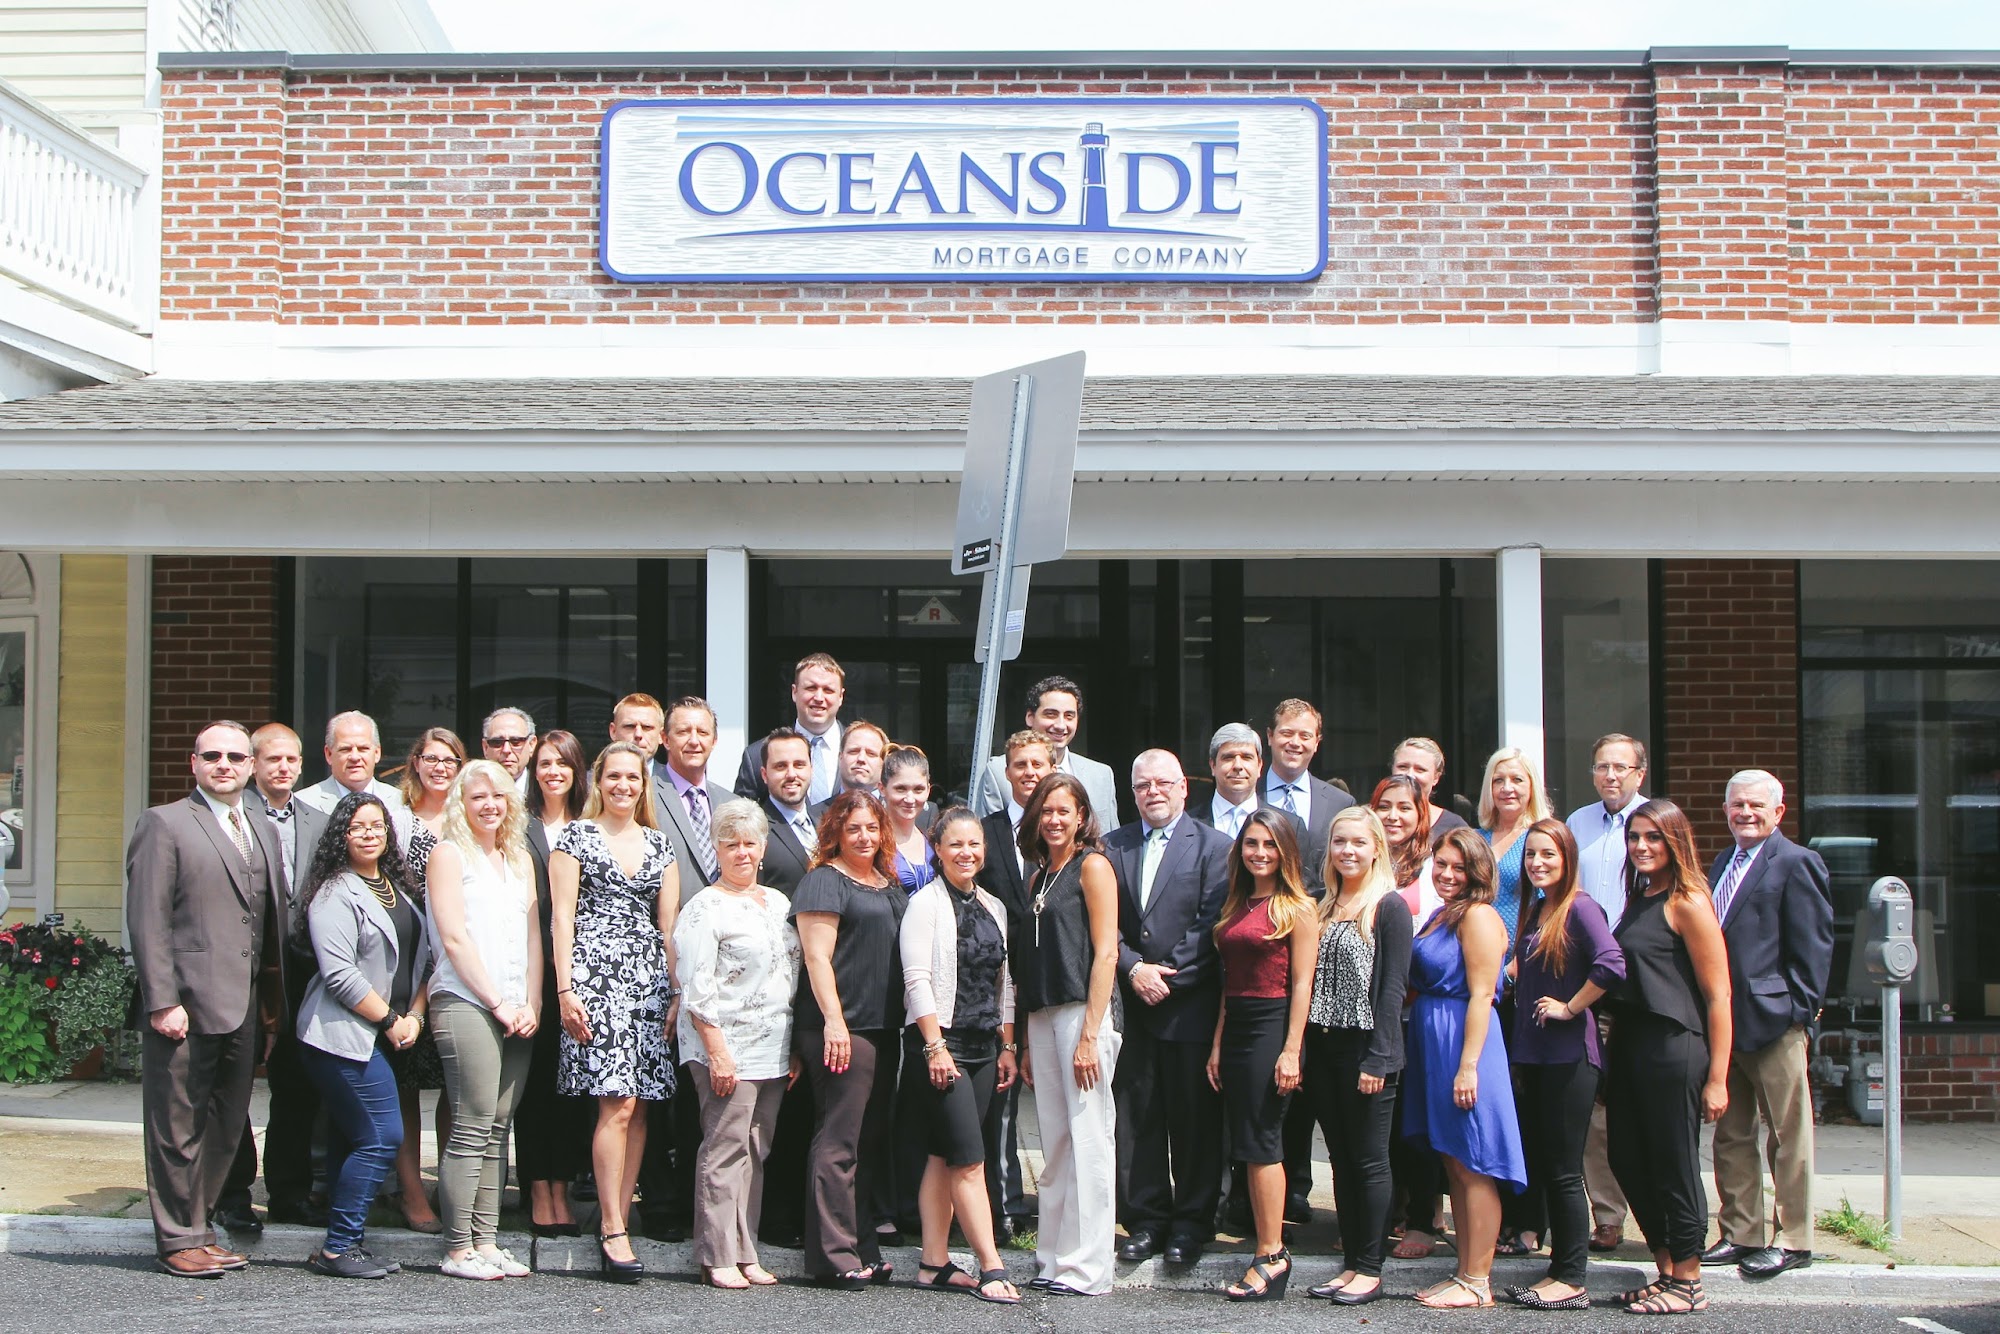 Oceanside Mortgage Company